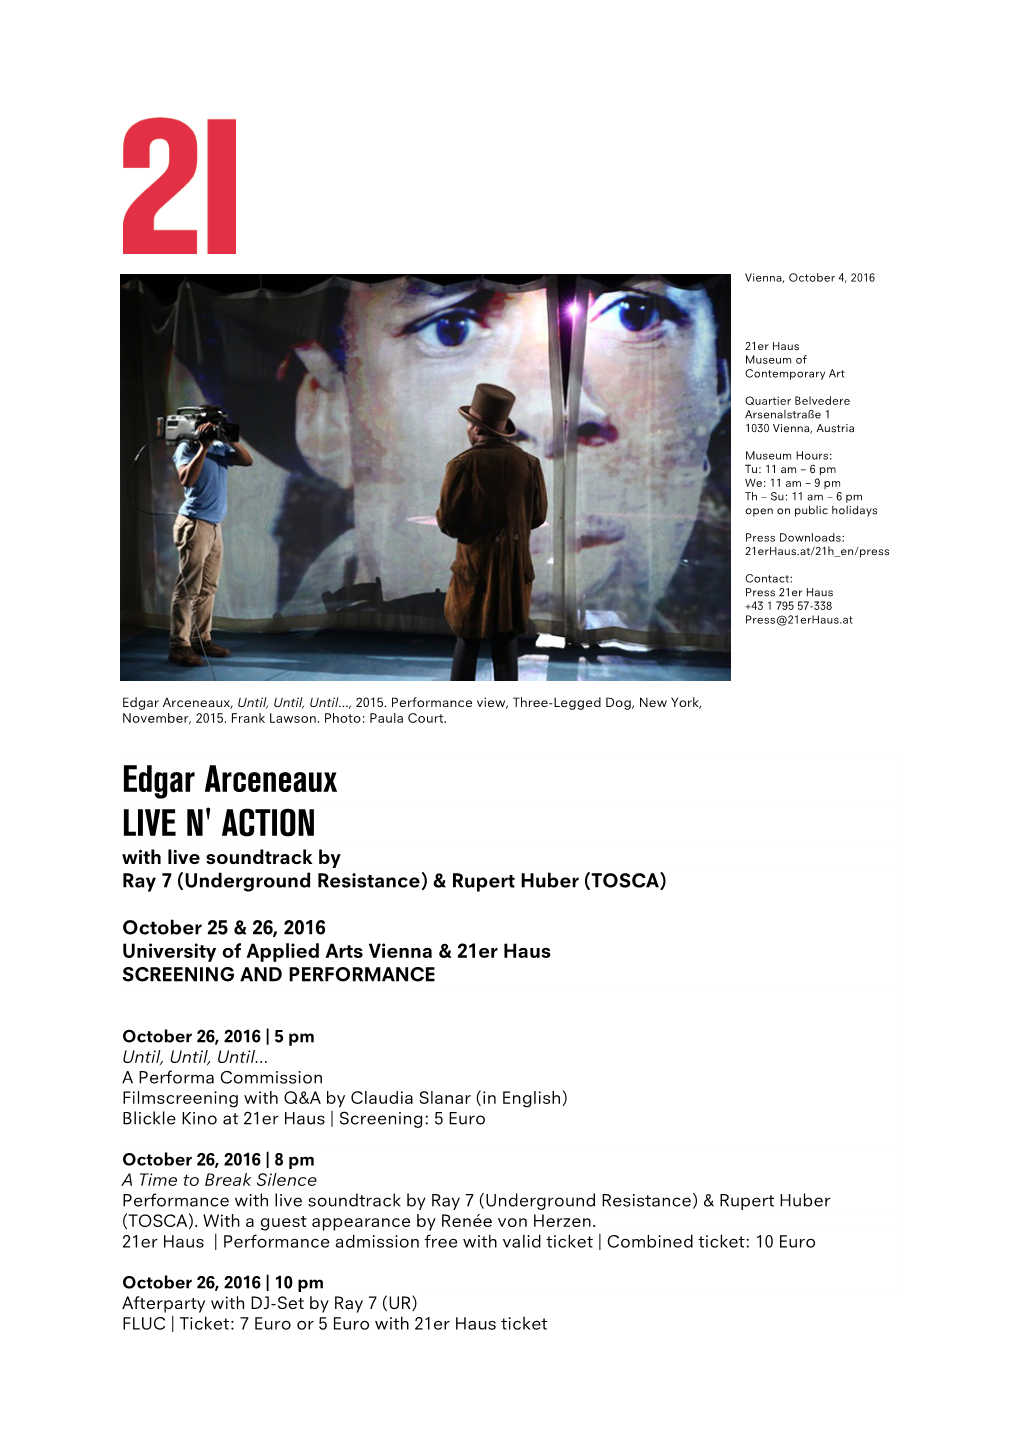 Edgar Arceneaux LIVE N' ACTION with Live Soundtrack by Ray 7 (Underground Resistance) & Rupert Huber (TOSCA)